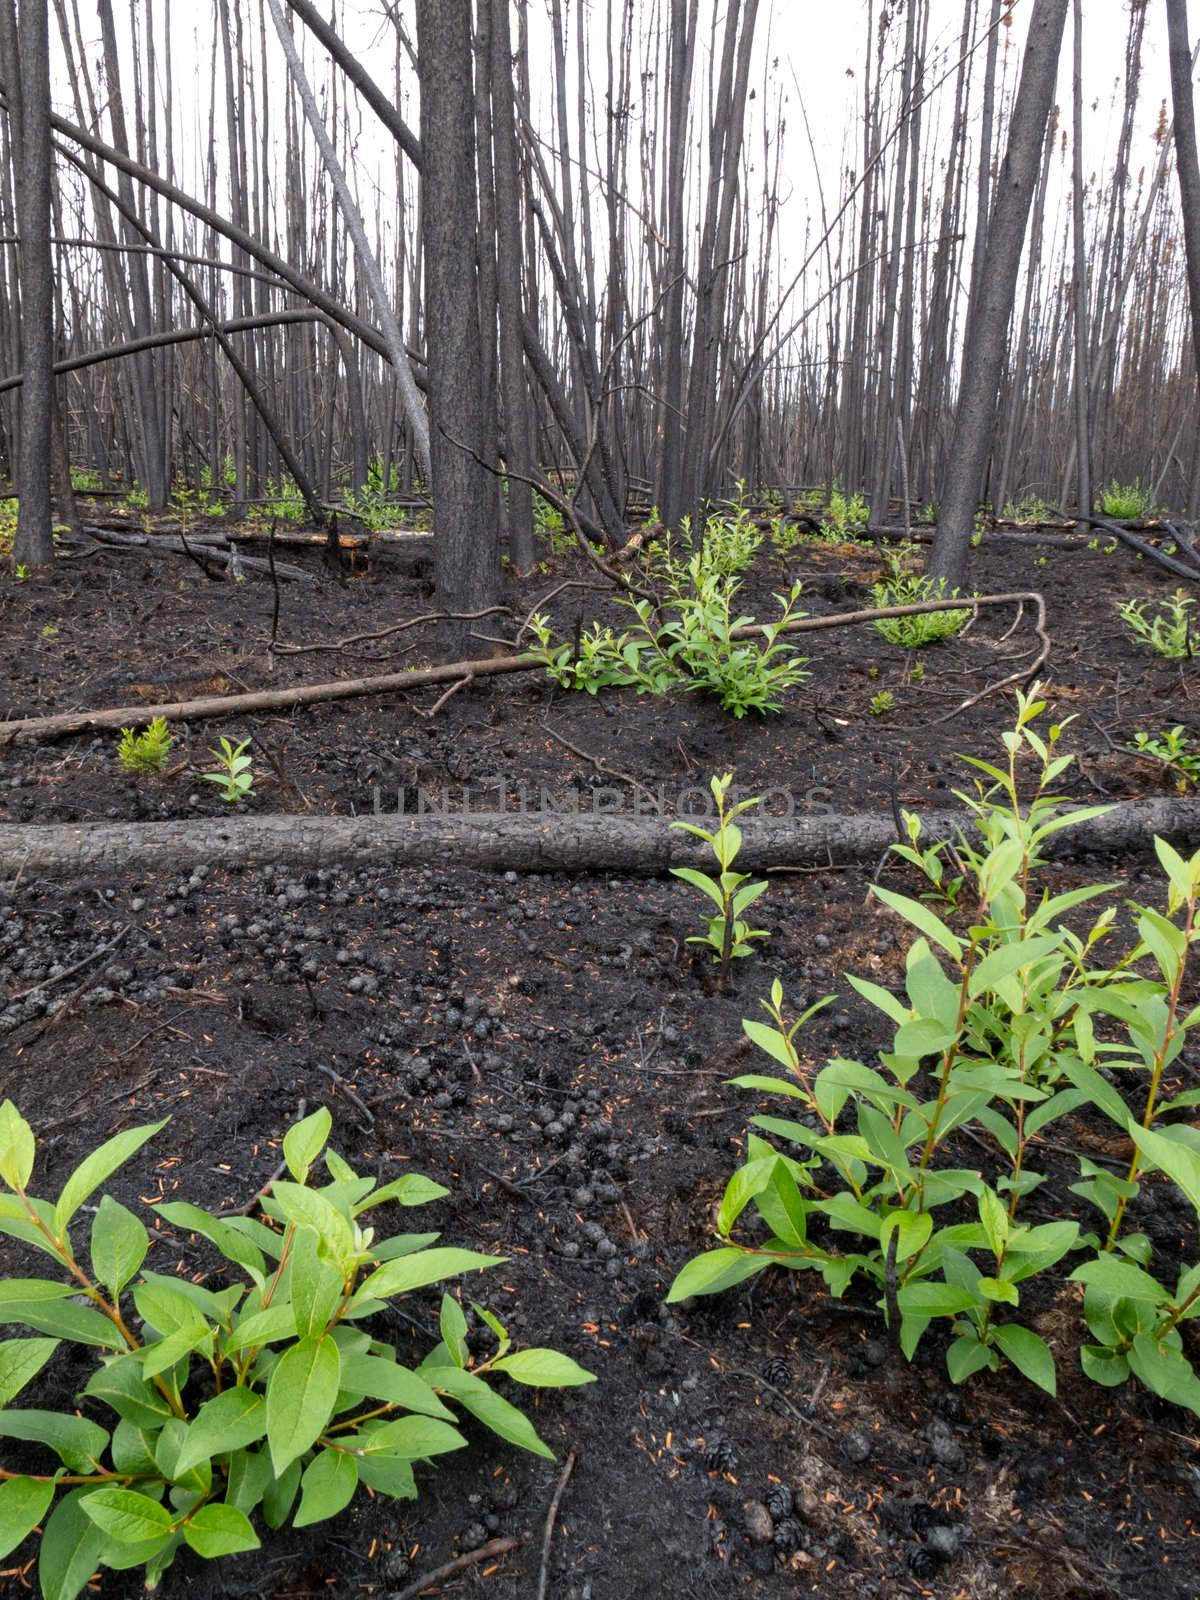 Recent burn of boreal forest by PiLens